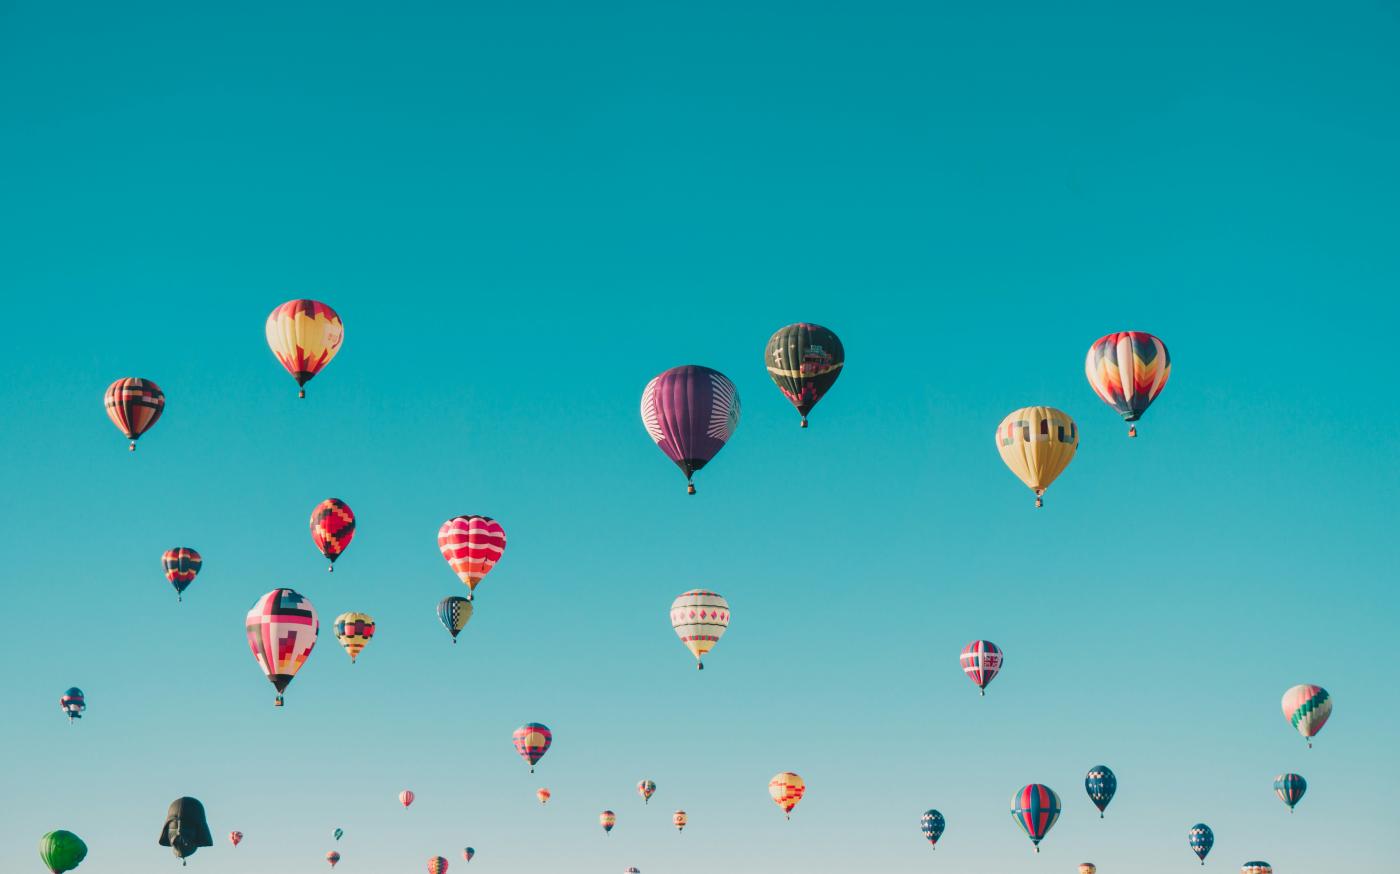 assorted-color hot air balloons during daytime by ian dooley courtesy of Unsplash.